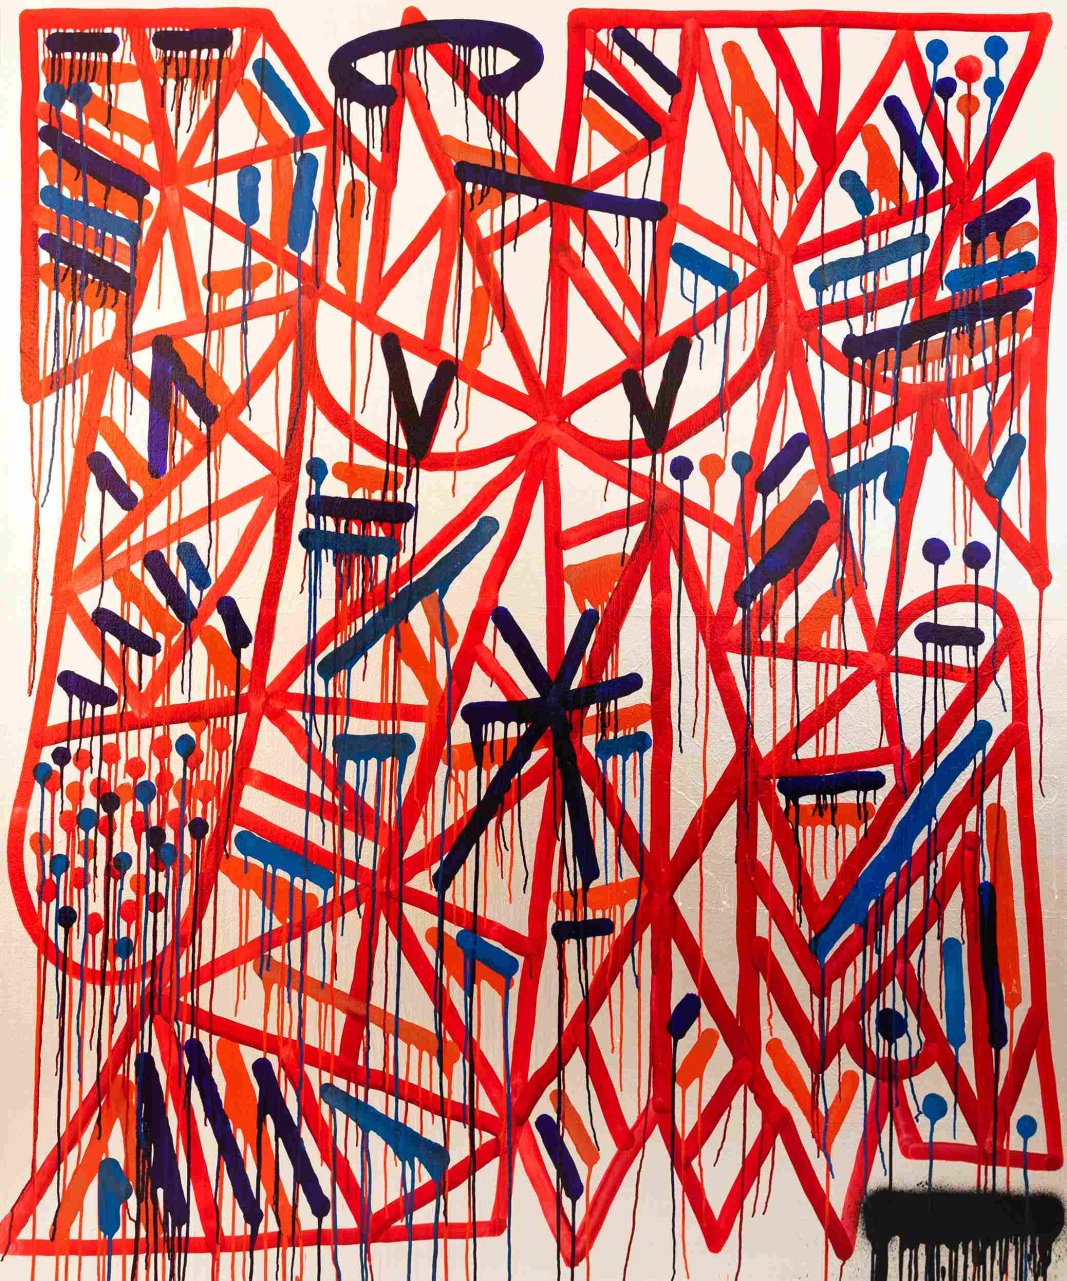 Solomostry_Crossed Red_(2022)_Spray, ink and metallic varnish on jute canvas, 150,5x180 cm_Credits Vittorio Lico